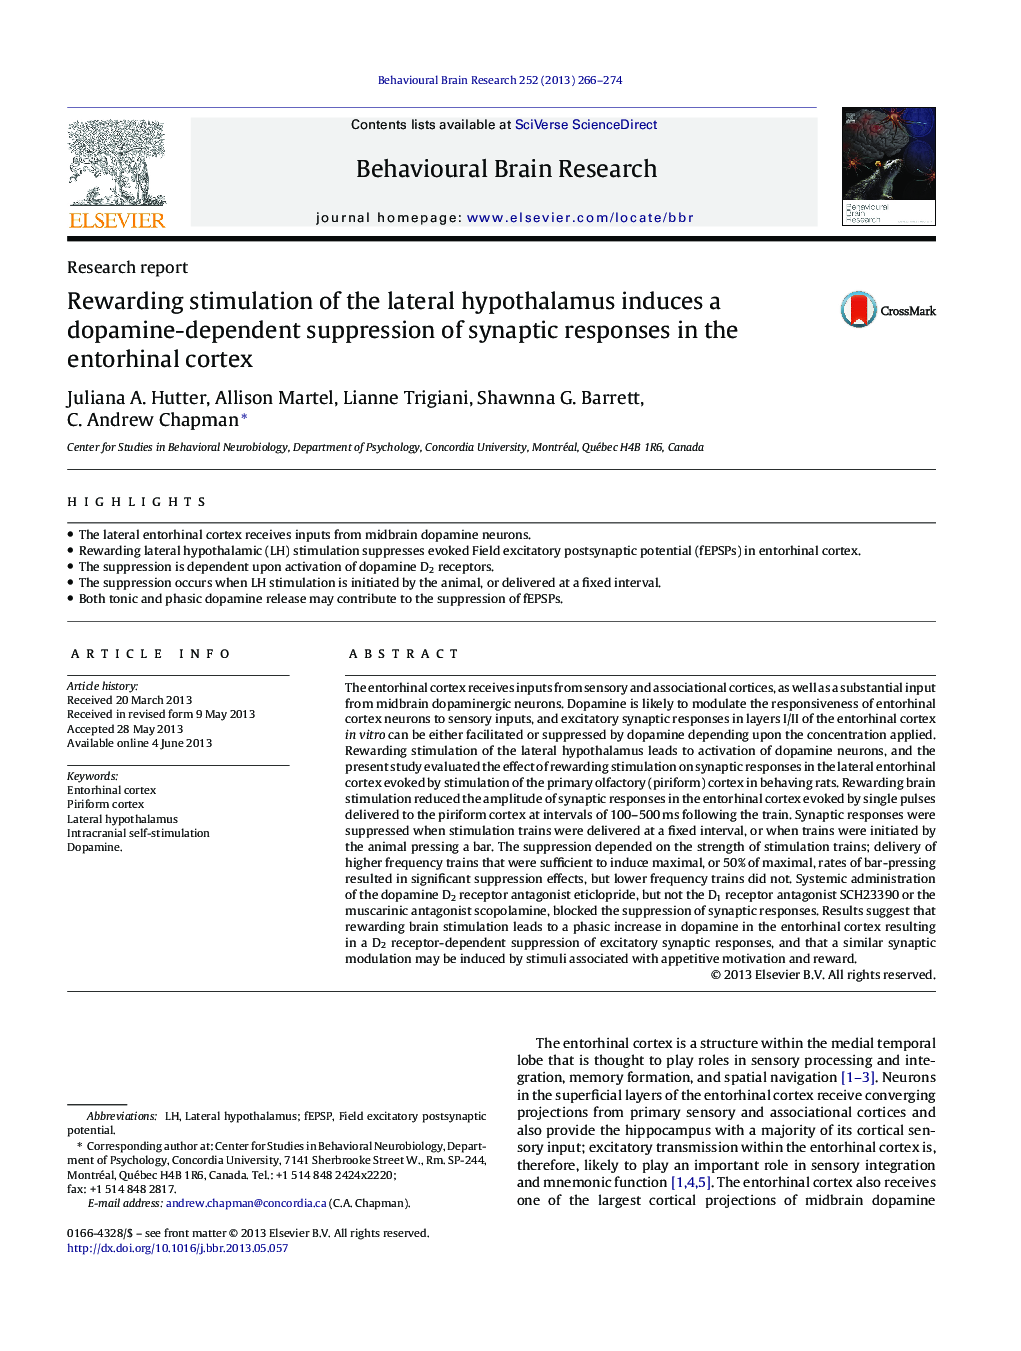 Rewarding stimulation of the lateral hypothalamus induces a dopamine-dependent suppression of synaptic responses in the entorhinal cortex